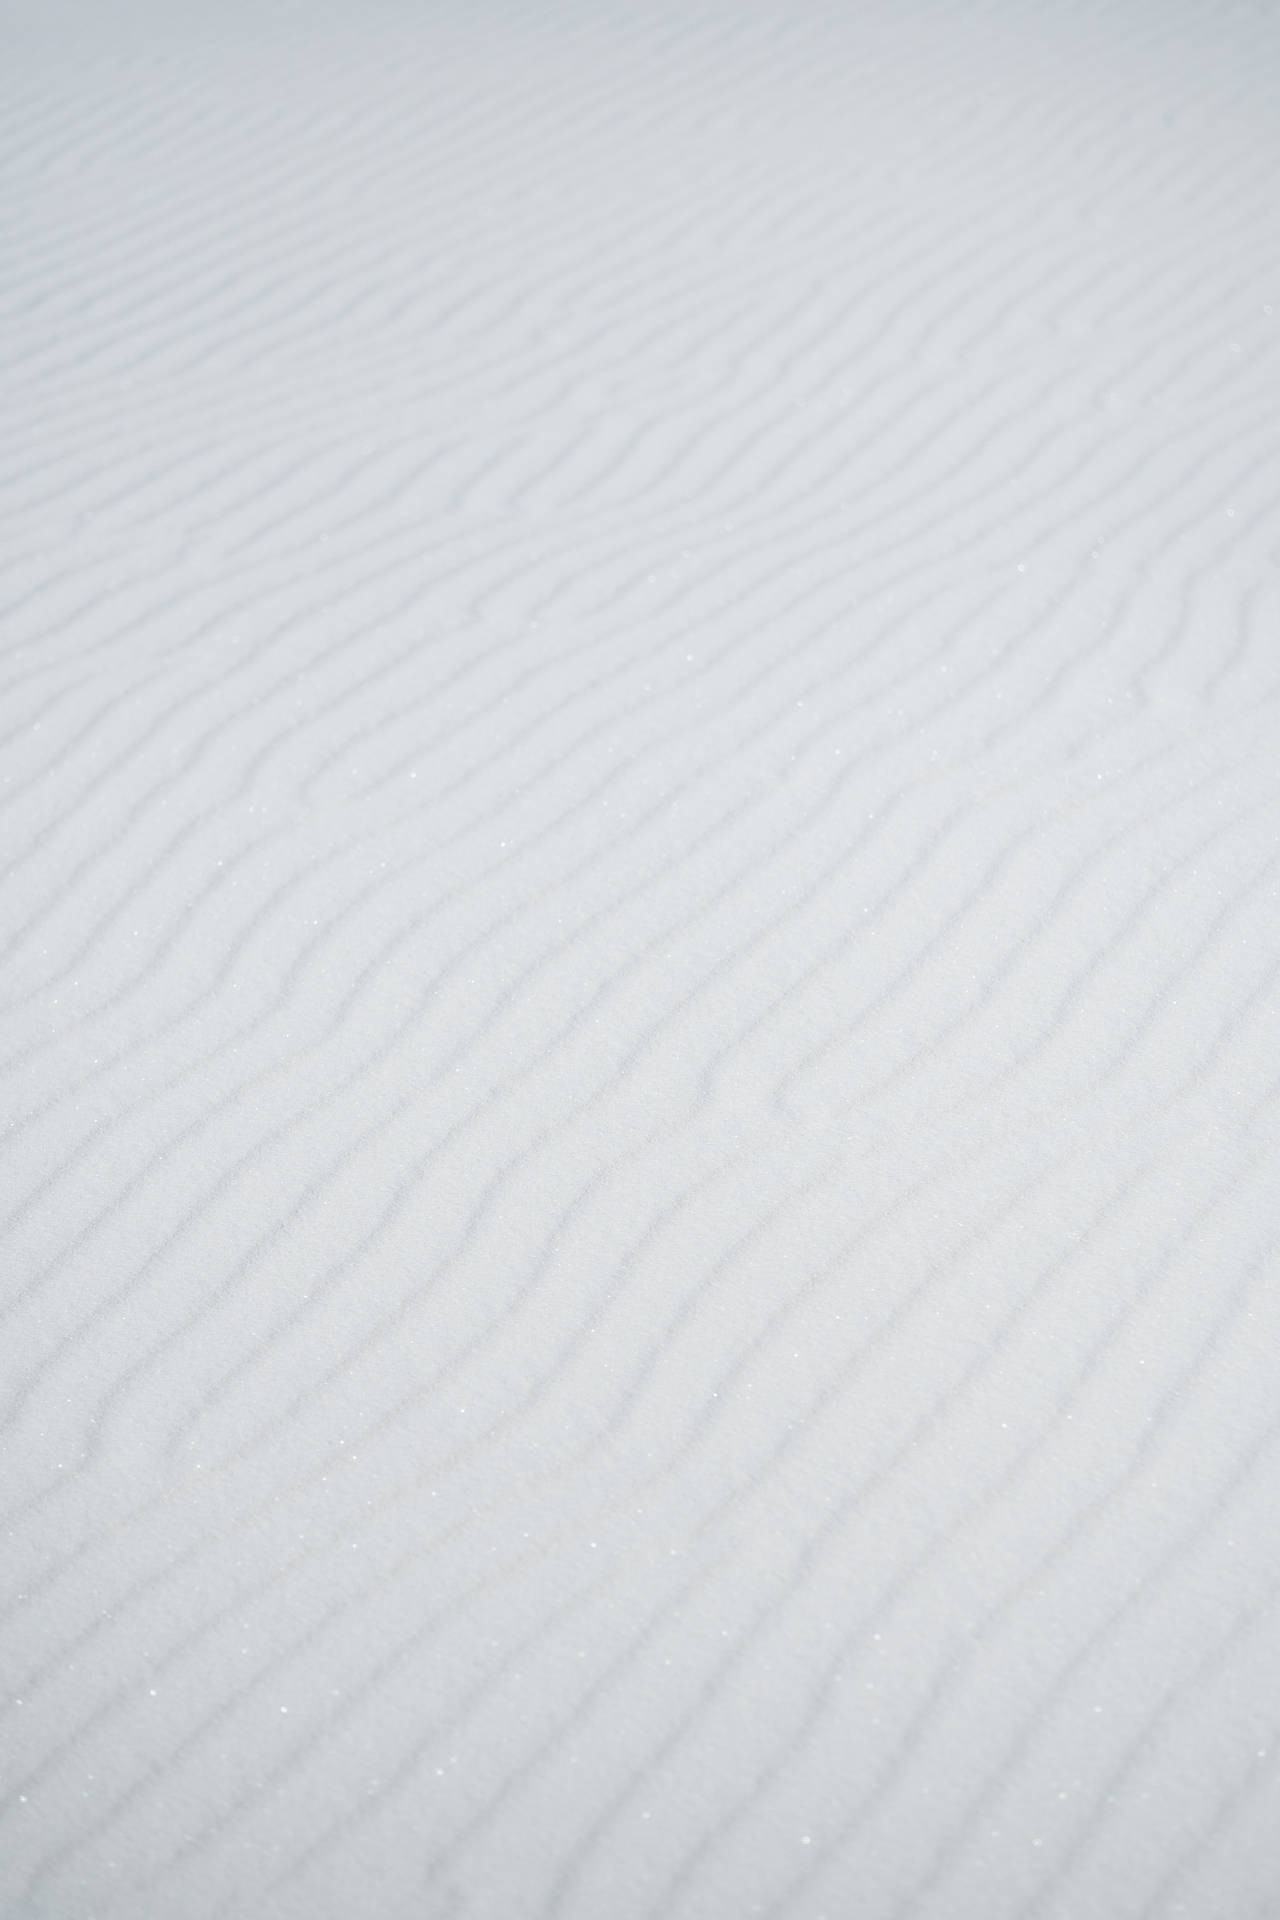 White Screen With Abstract Waves Background